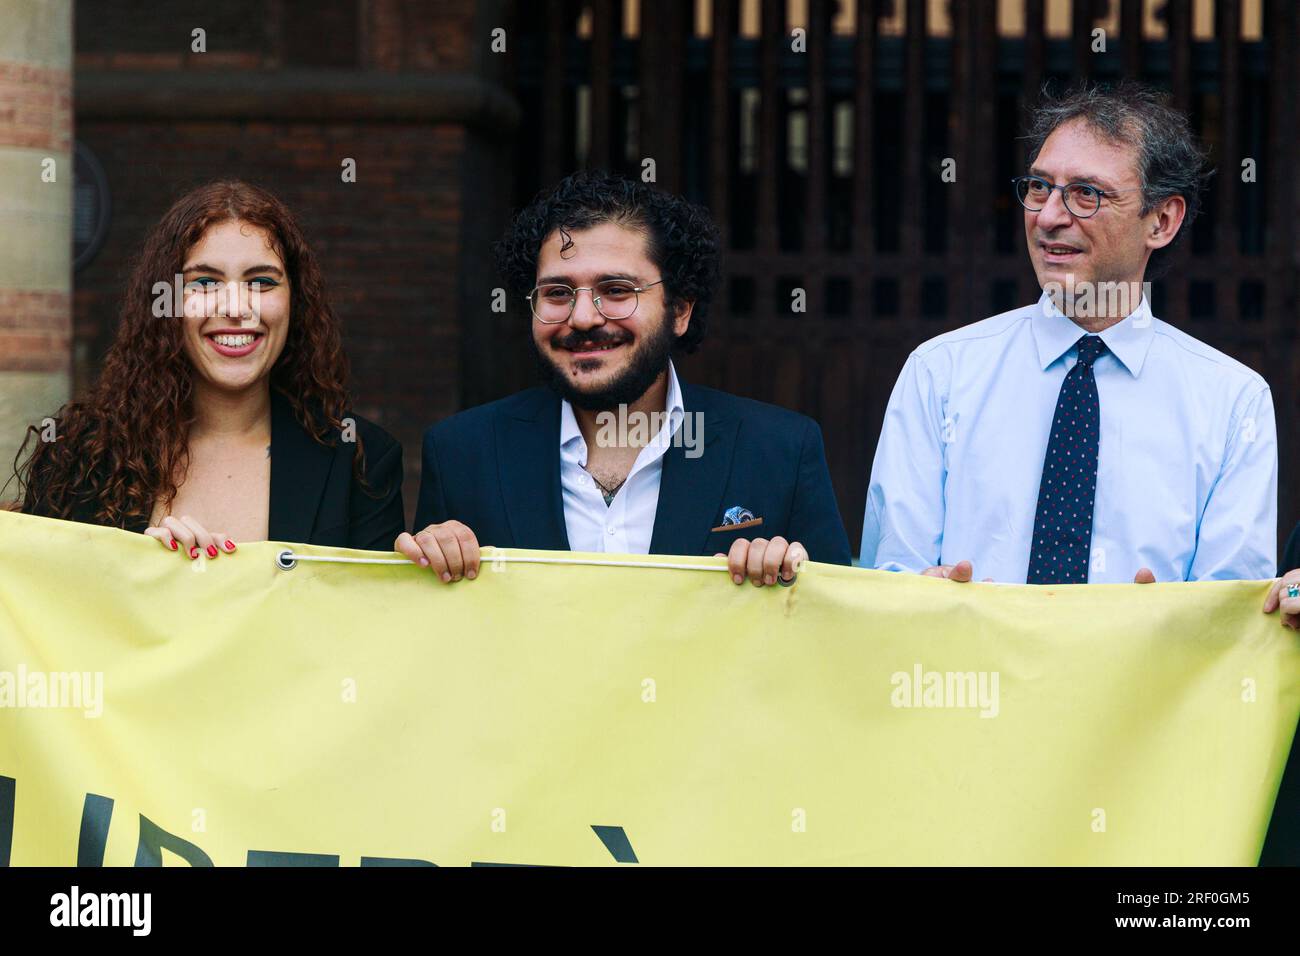 Bologna, ITALY. July 30, 2023. Ceremony to confer honorary citizenship to Egyptian human rights activist Patrick Zaki, free after more than 3 years in prison in Egypt and a student at the University of Bologna, in Piazza Maggiore on July 30, 2023 in Bologna, Italy. Credit: Massimiliano Donati/Alamy Live News Stock Photo